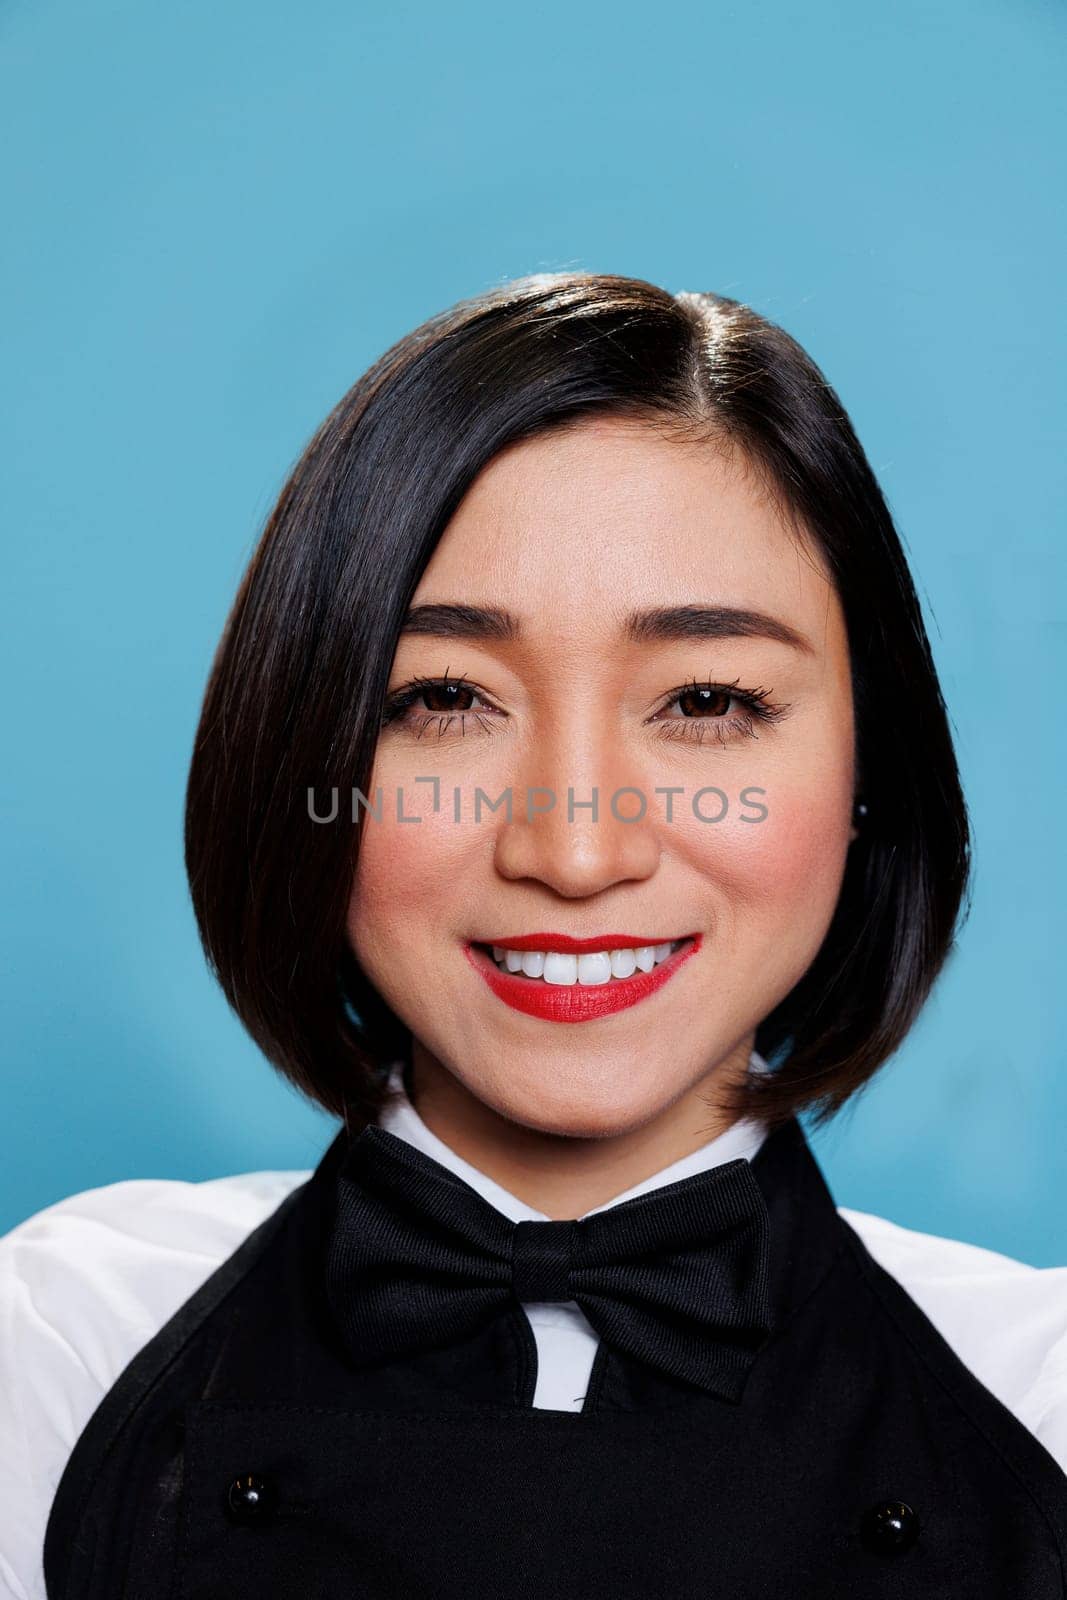 Smiling young attractive asian woman wearing waitress black and white uniform with bow tie closeup portrait. Cheerful woman receptionist looking at camera with positive facial expression